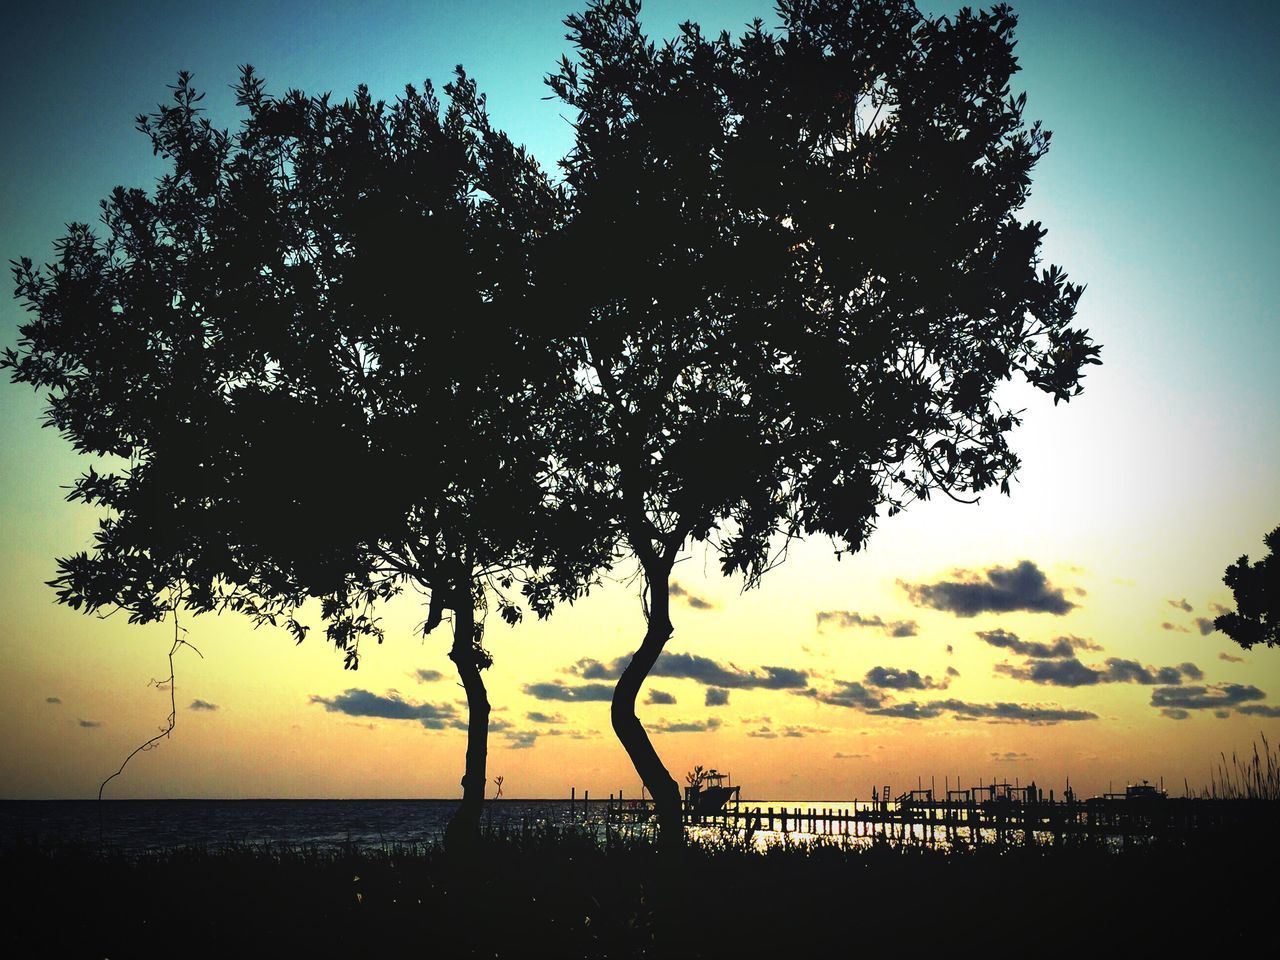 sunset, sea, silhouette, tranquility, scenics, tranquil scene, horizon over water, beauty in nature, water, beach, sky, tree, nature, idyllic, shore, branch, orange color, tree trunk, non-urban scene, growth